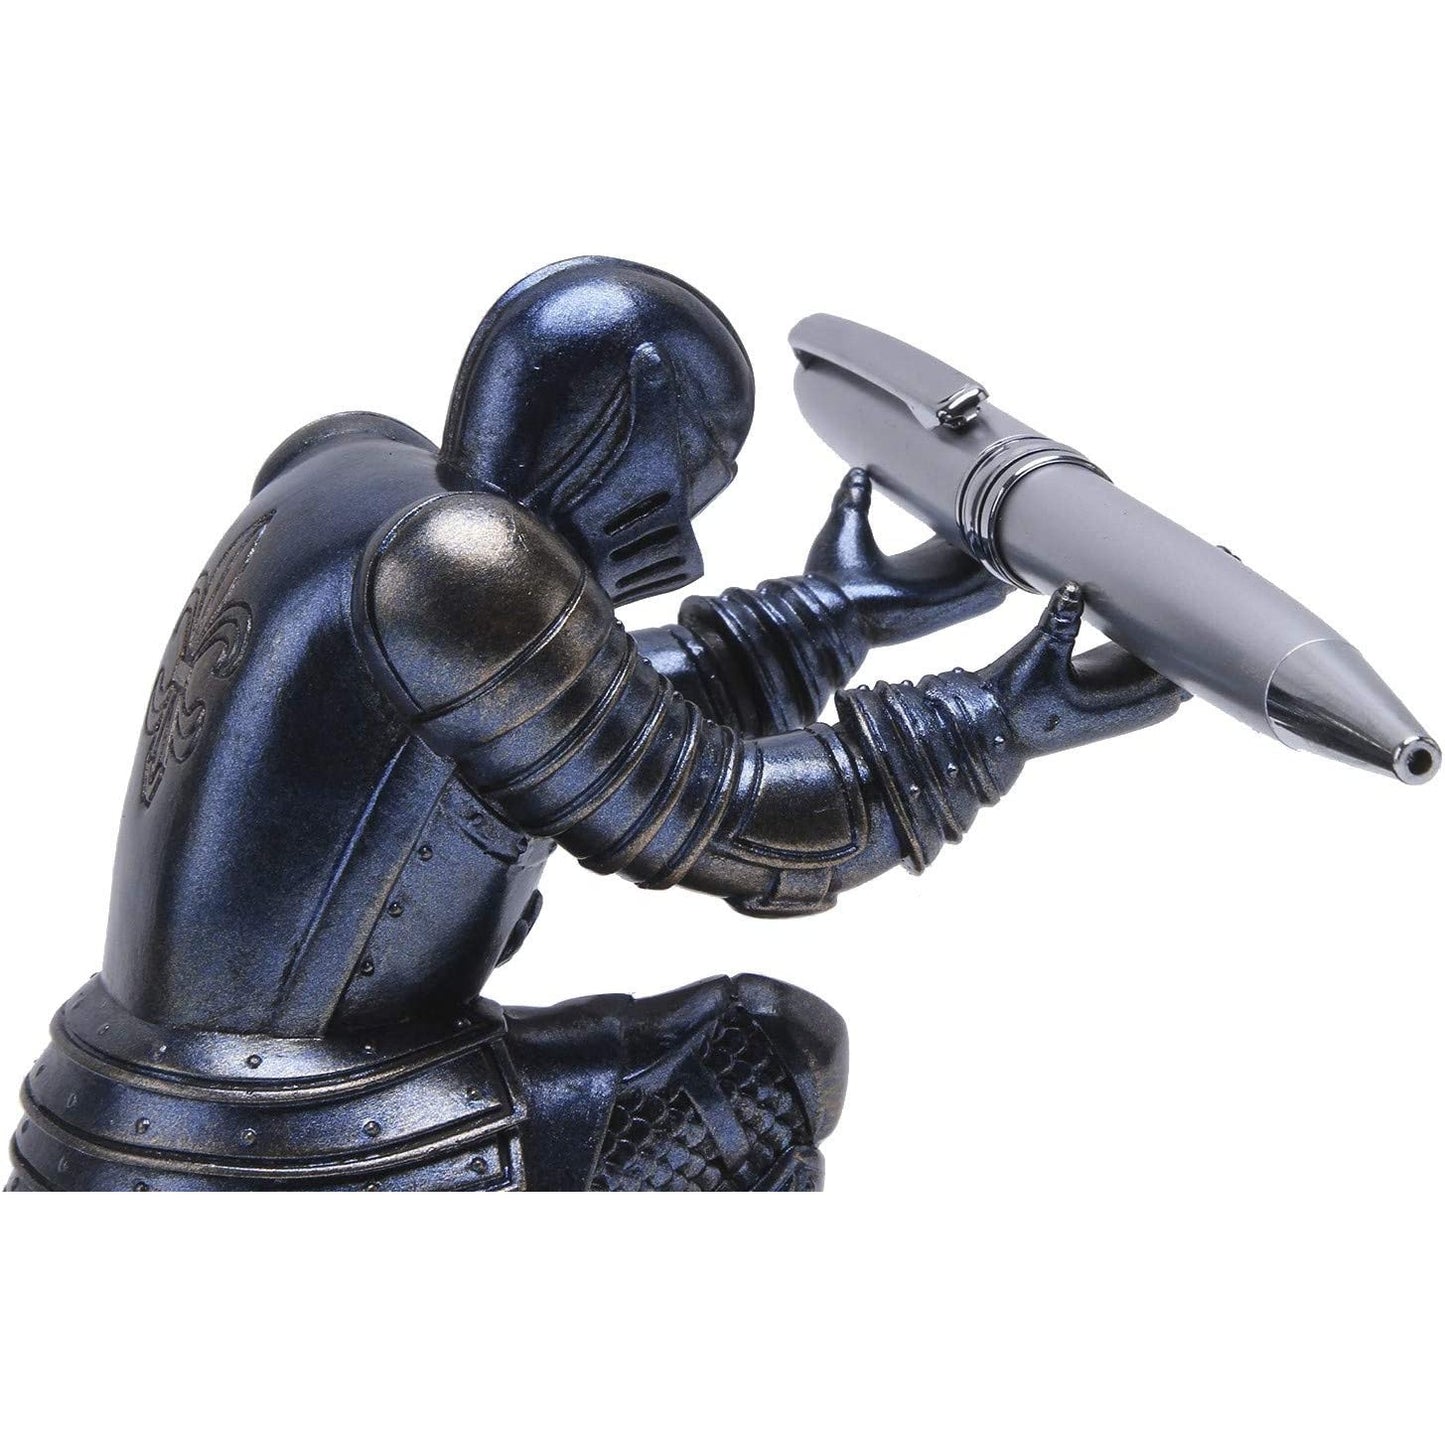 A close up view of a knight pen holder holding a silver pen.